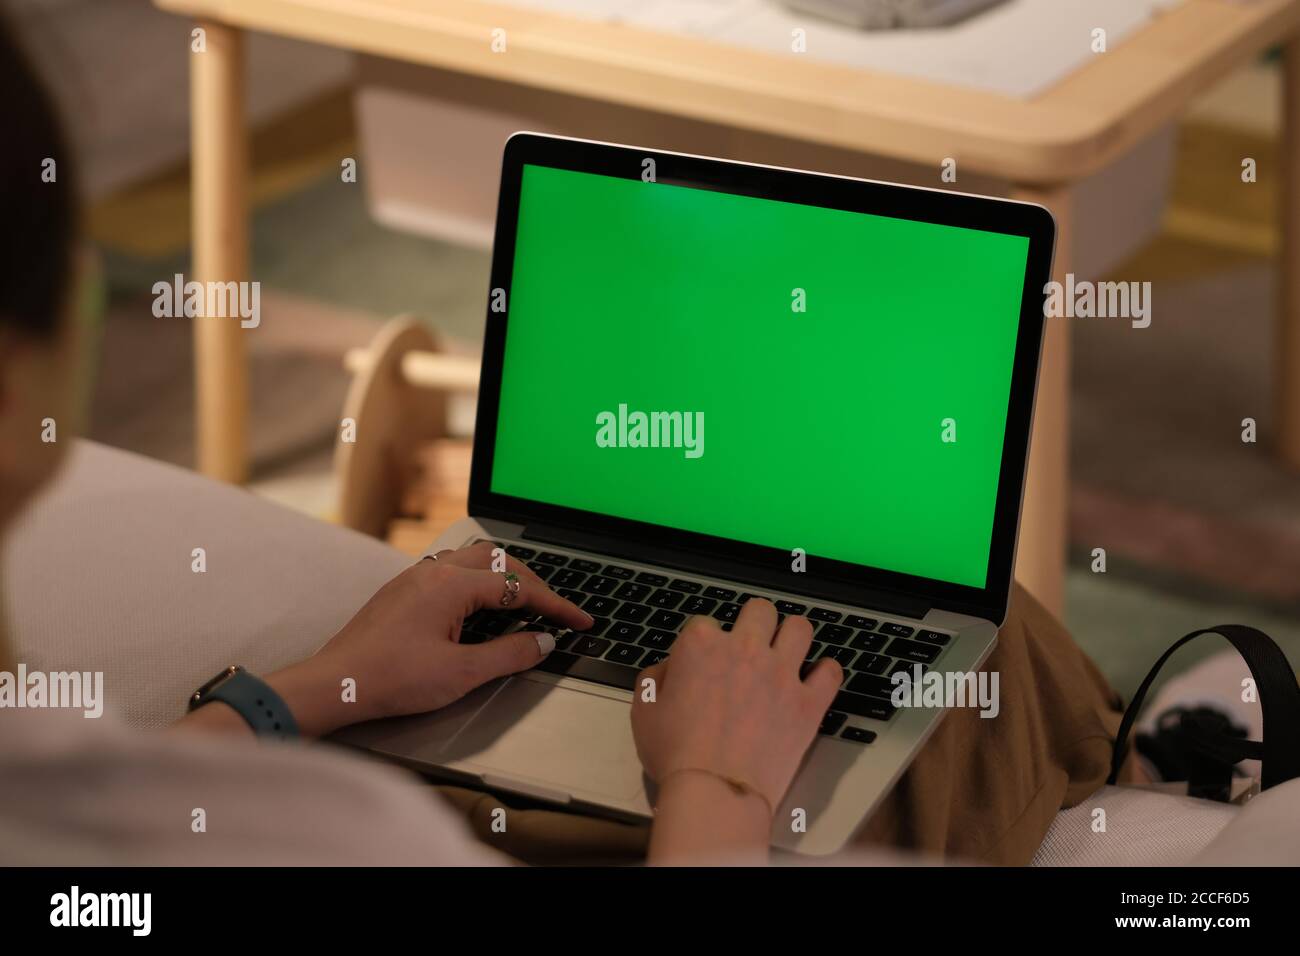 over shoulder view of people using green screen laptop computer at home. working at home concept. blur background Stock Photo